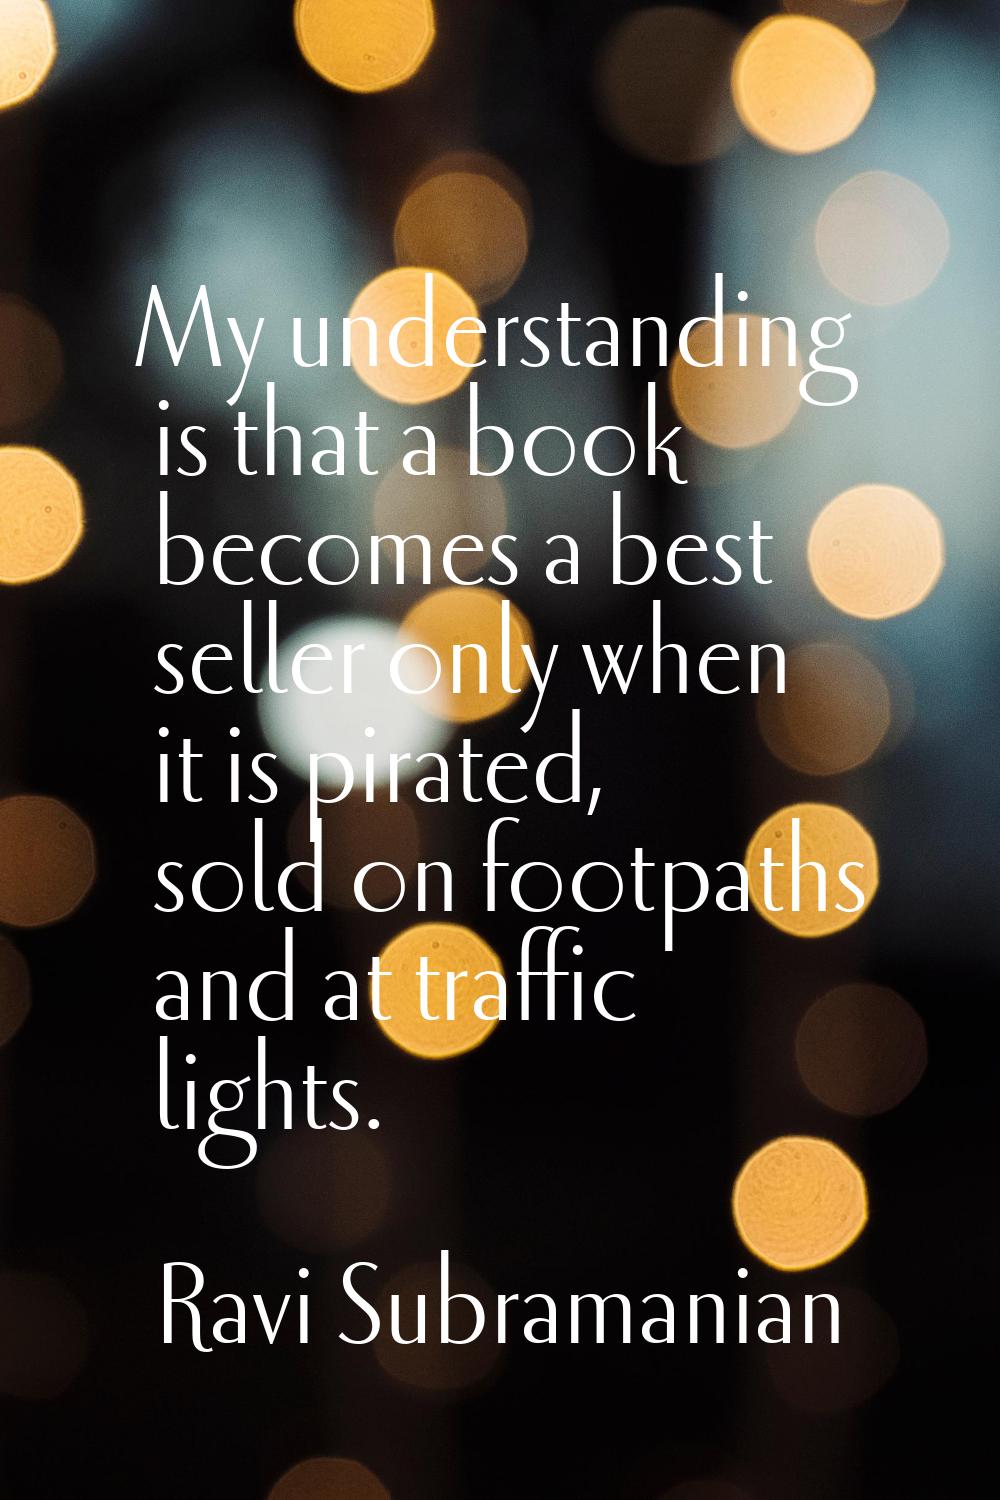 My understanding is that a book becomes a best seller only when it is pirated, sold on footpaths an